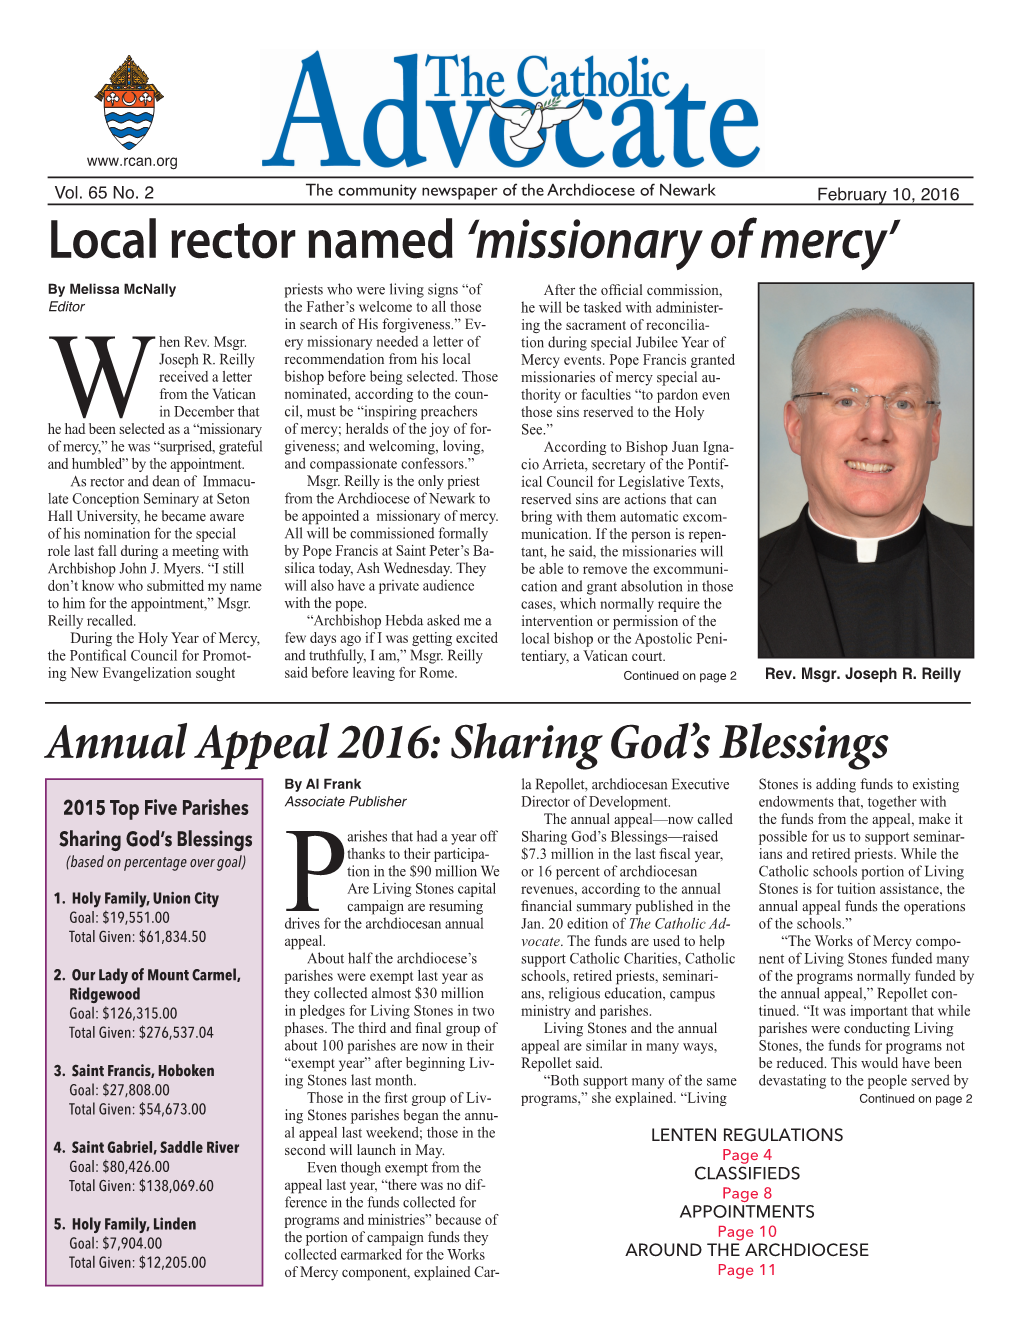 Local Rector Named 'Missionary of Mercy'